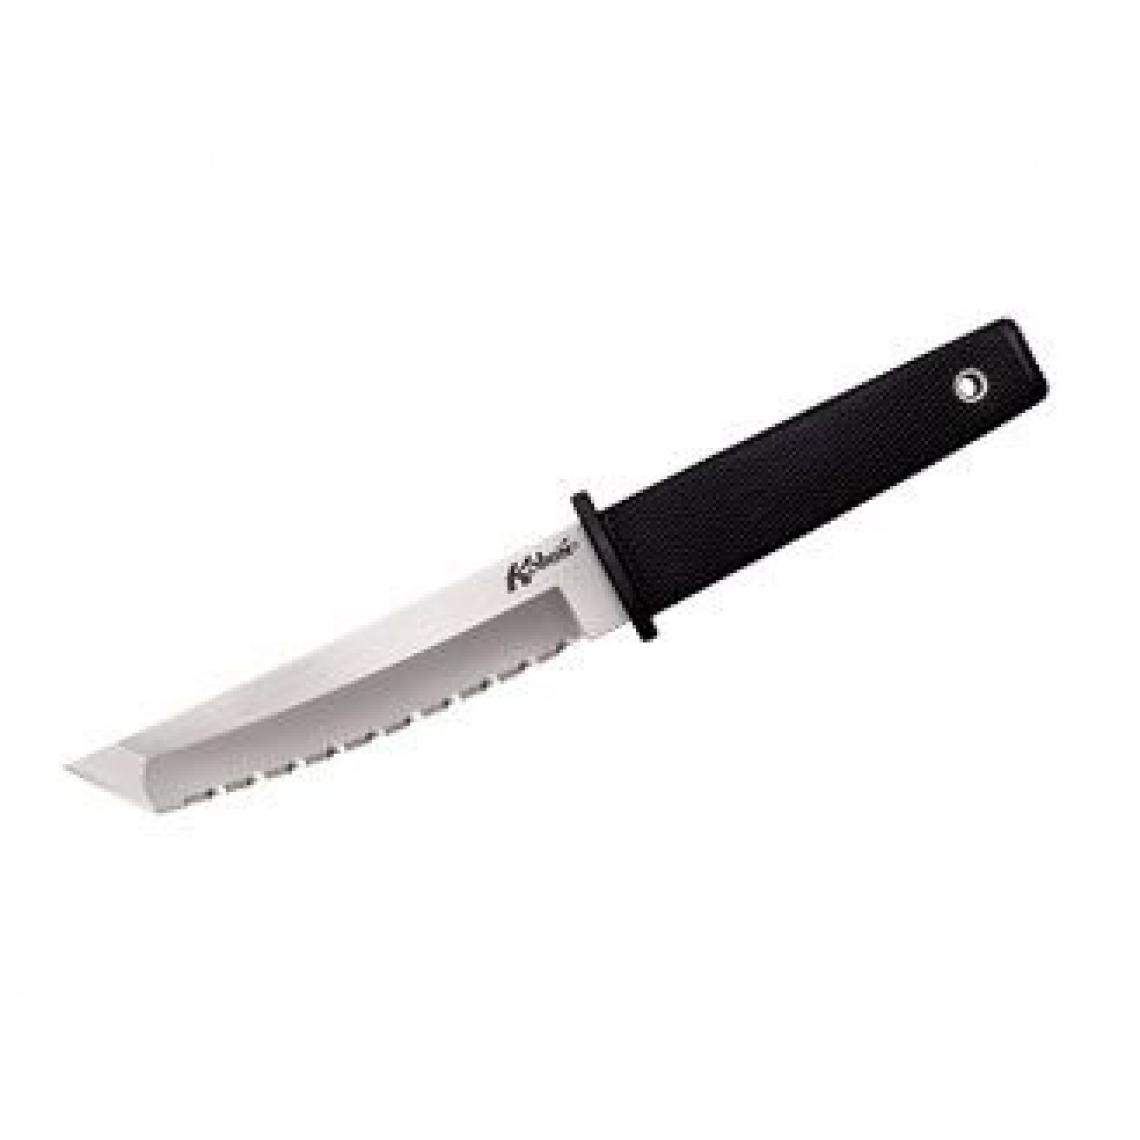 Divers Marques - Cold Steel KOBUN 17TS SERRATED - Outils de coupe